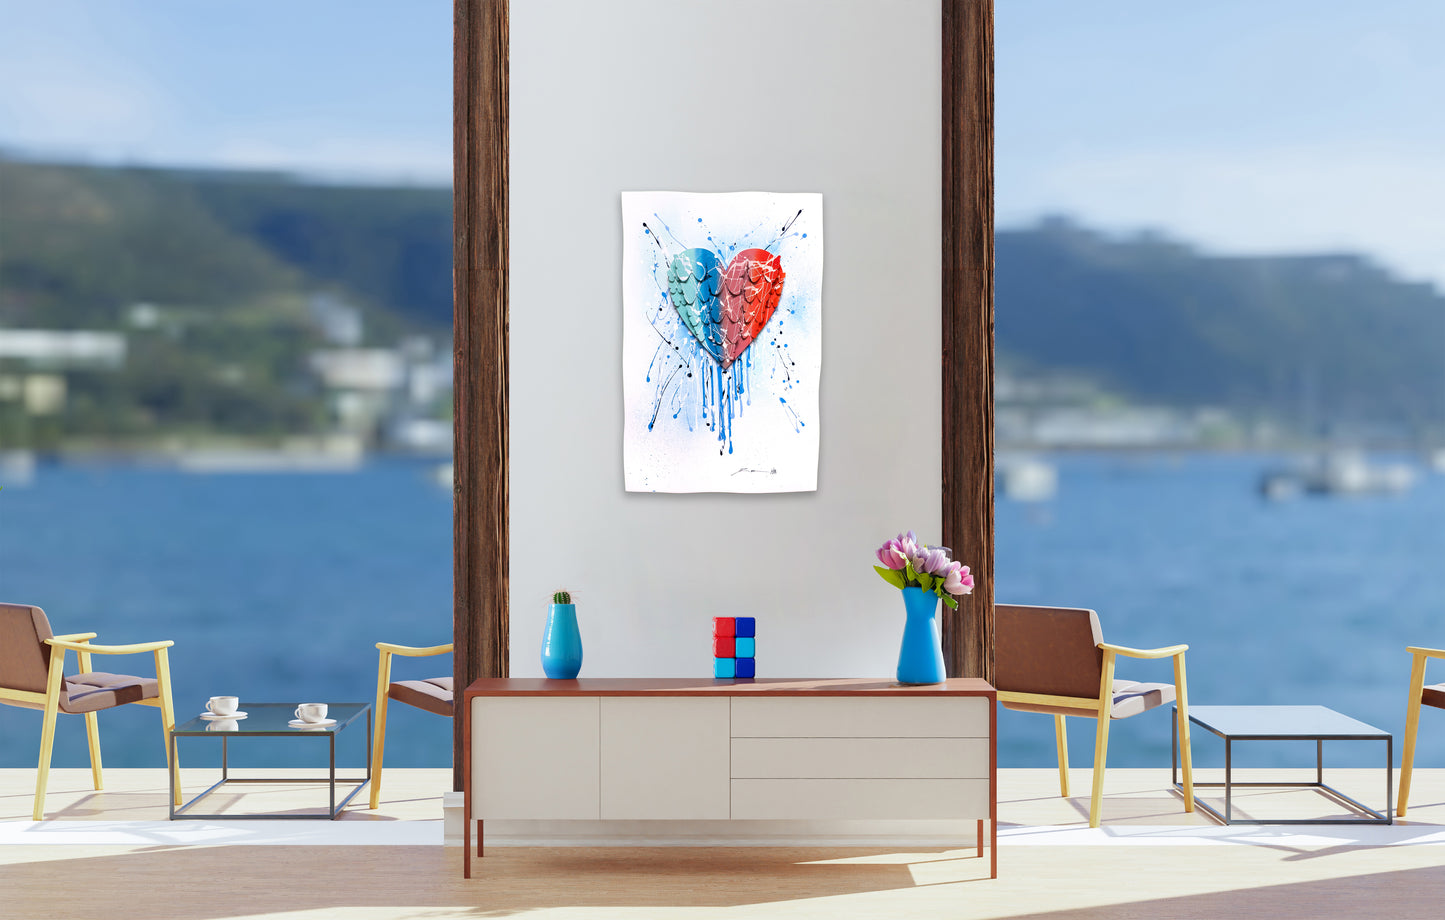 Dripping Colorful Heart hanged on wall with sea view behind